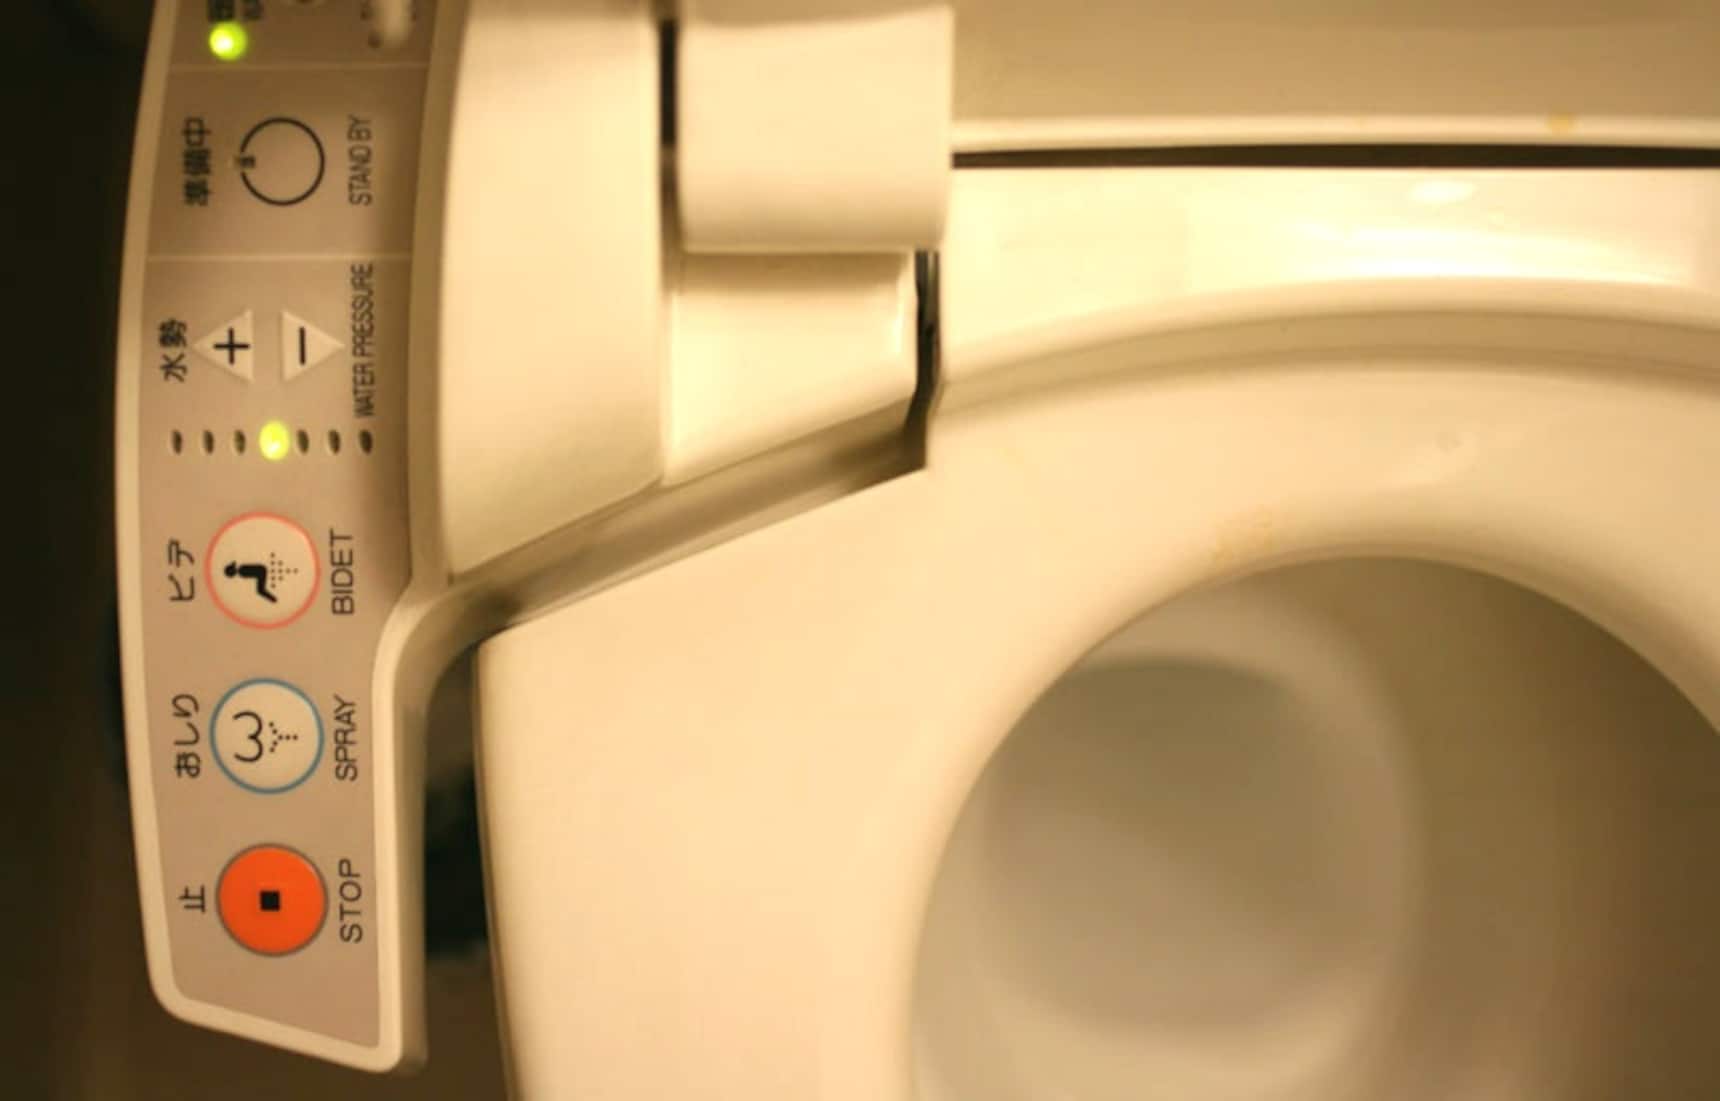 Japan Campaigns to Tout its High-Tech Toilets